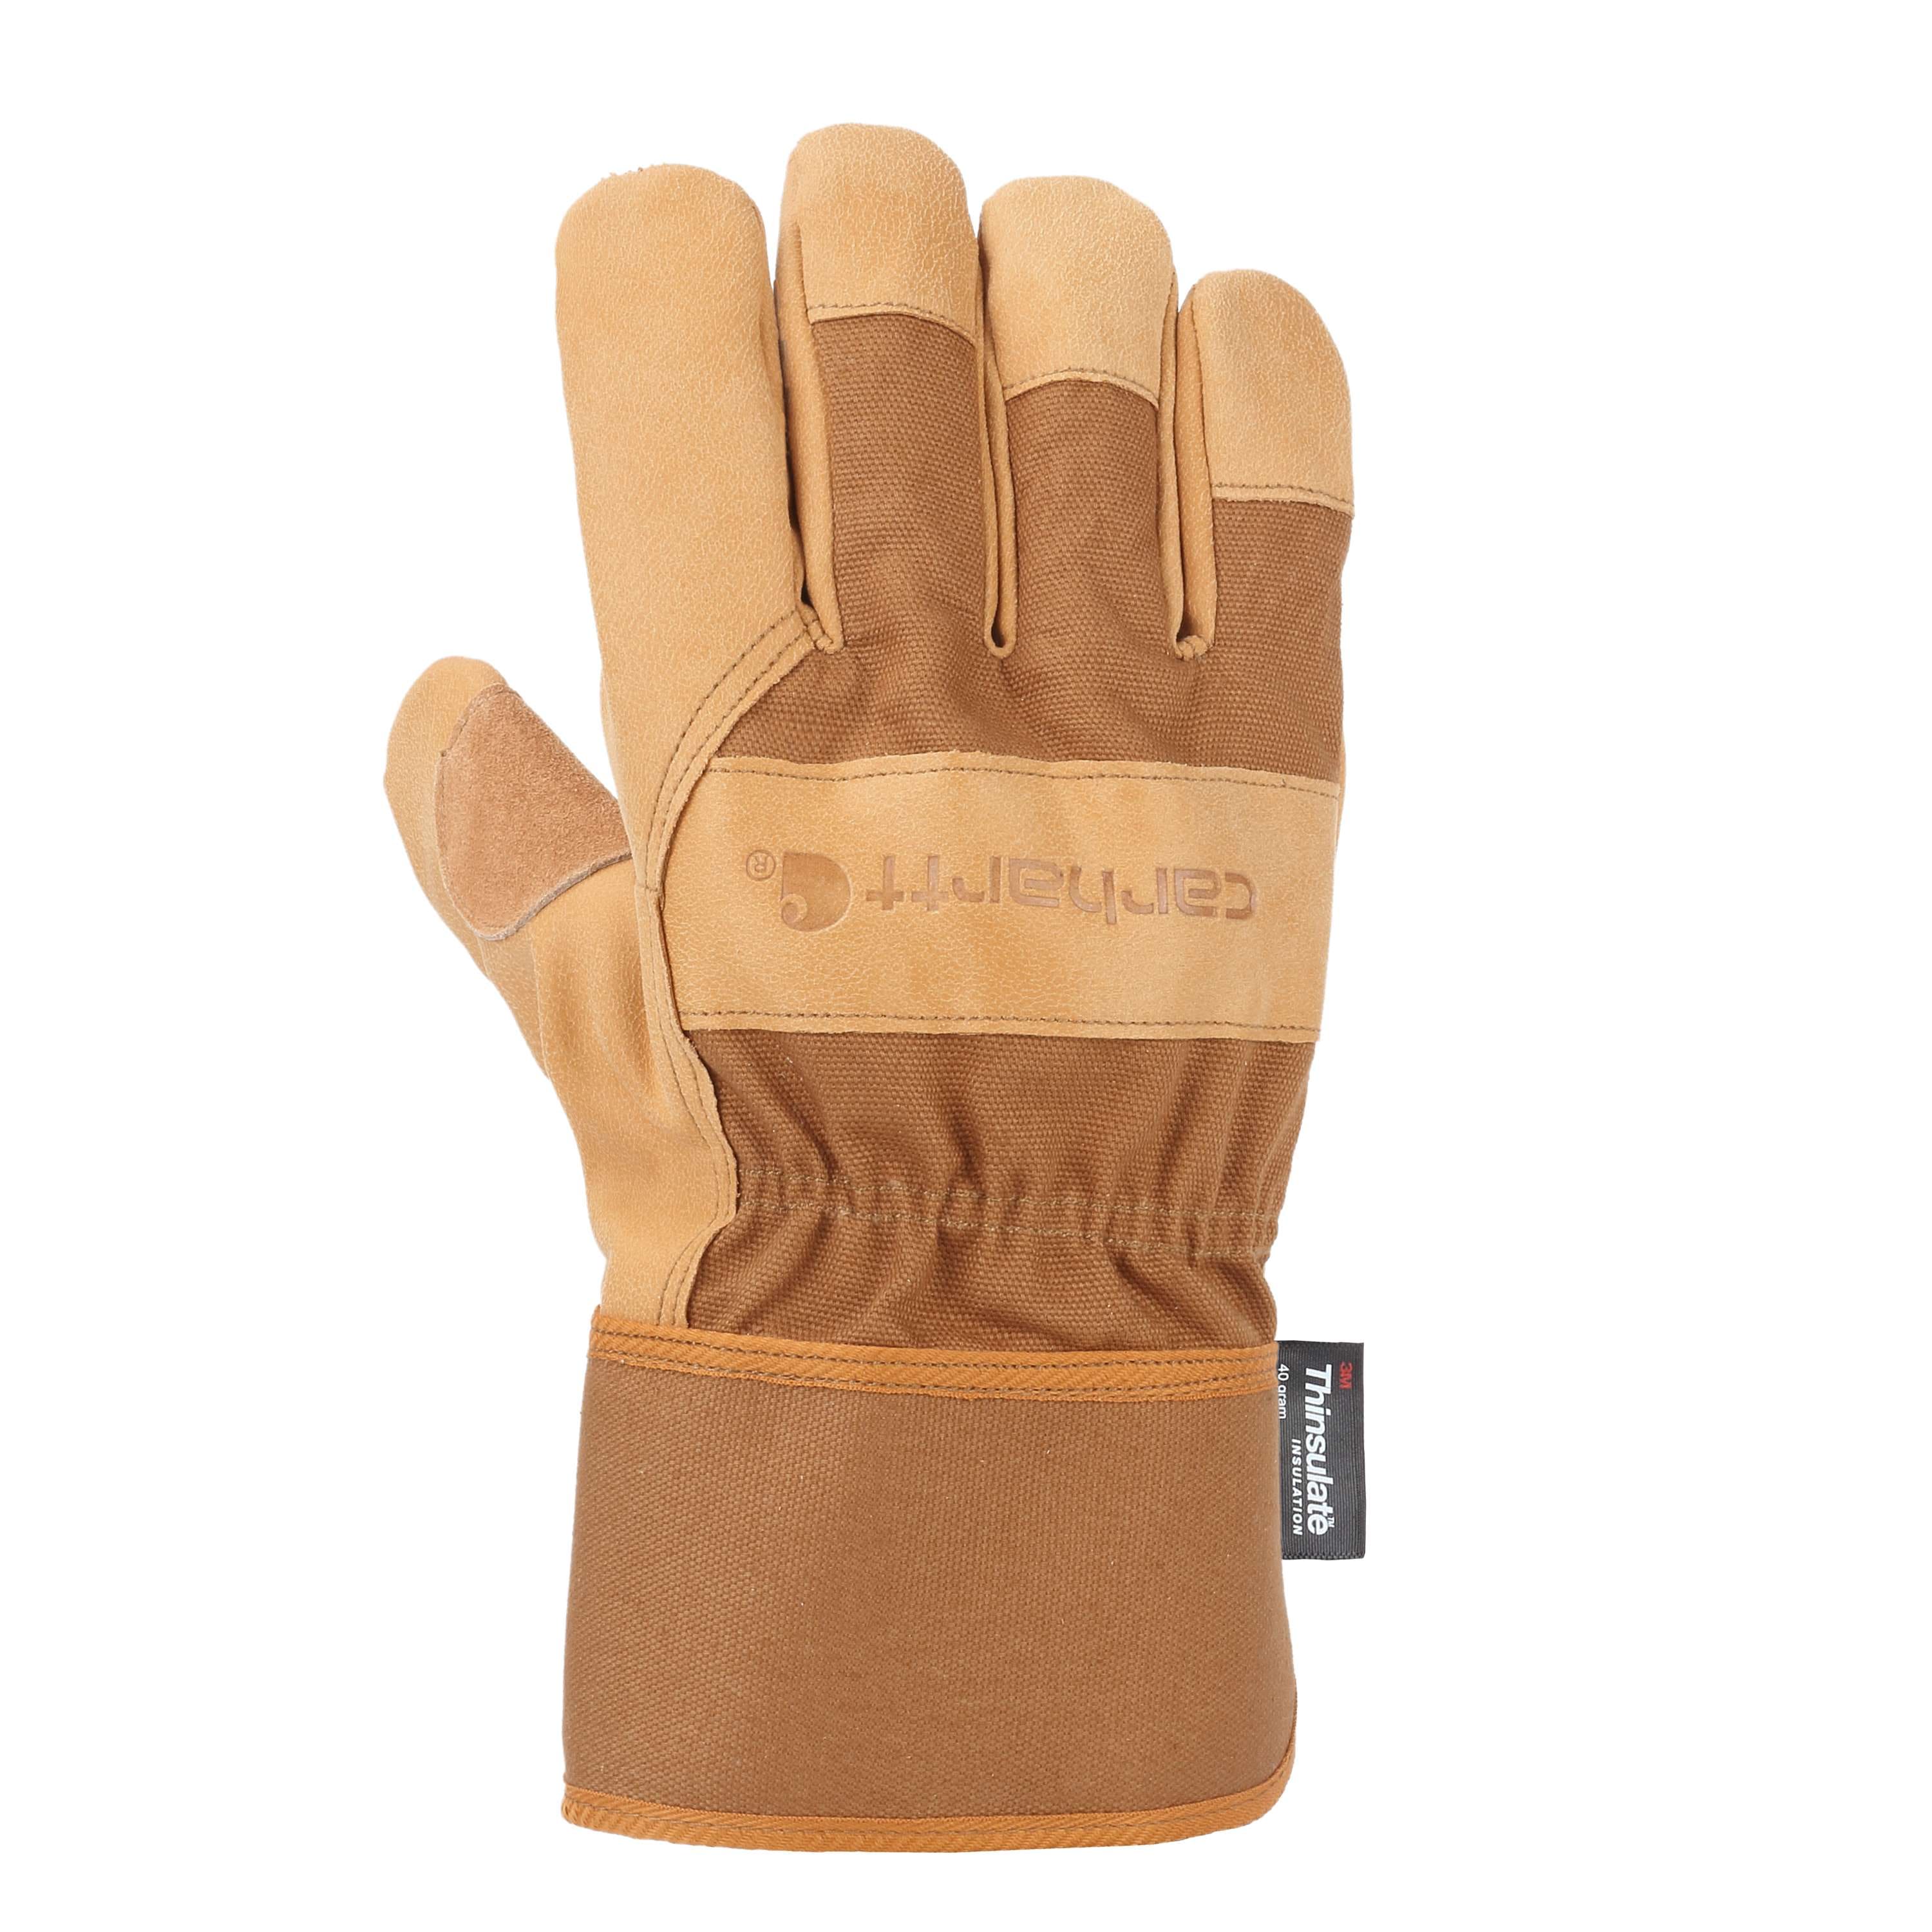 protective leather gloves